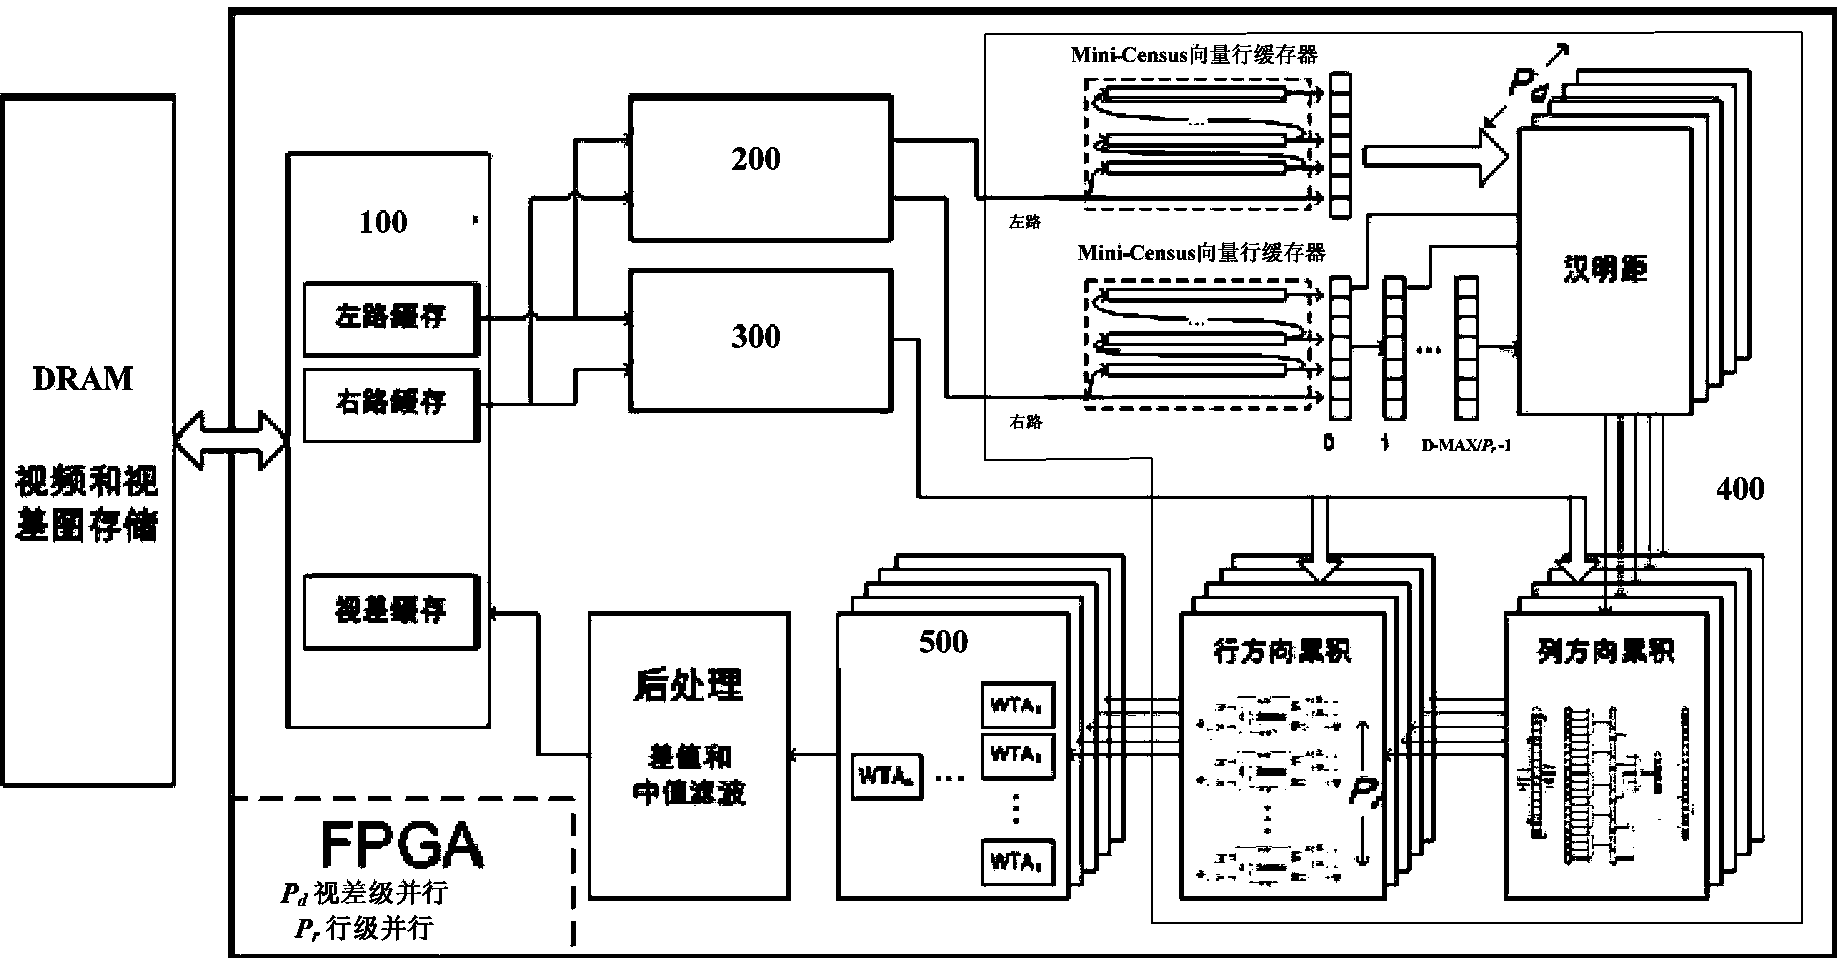 Hardware acceleration structure adopting variable supporting area stereo matching algorithm